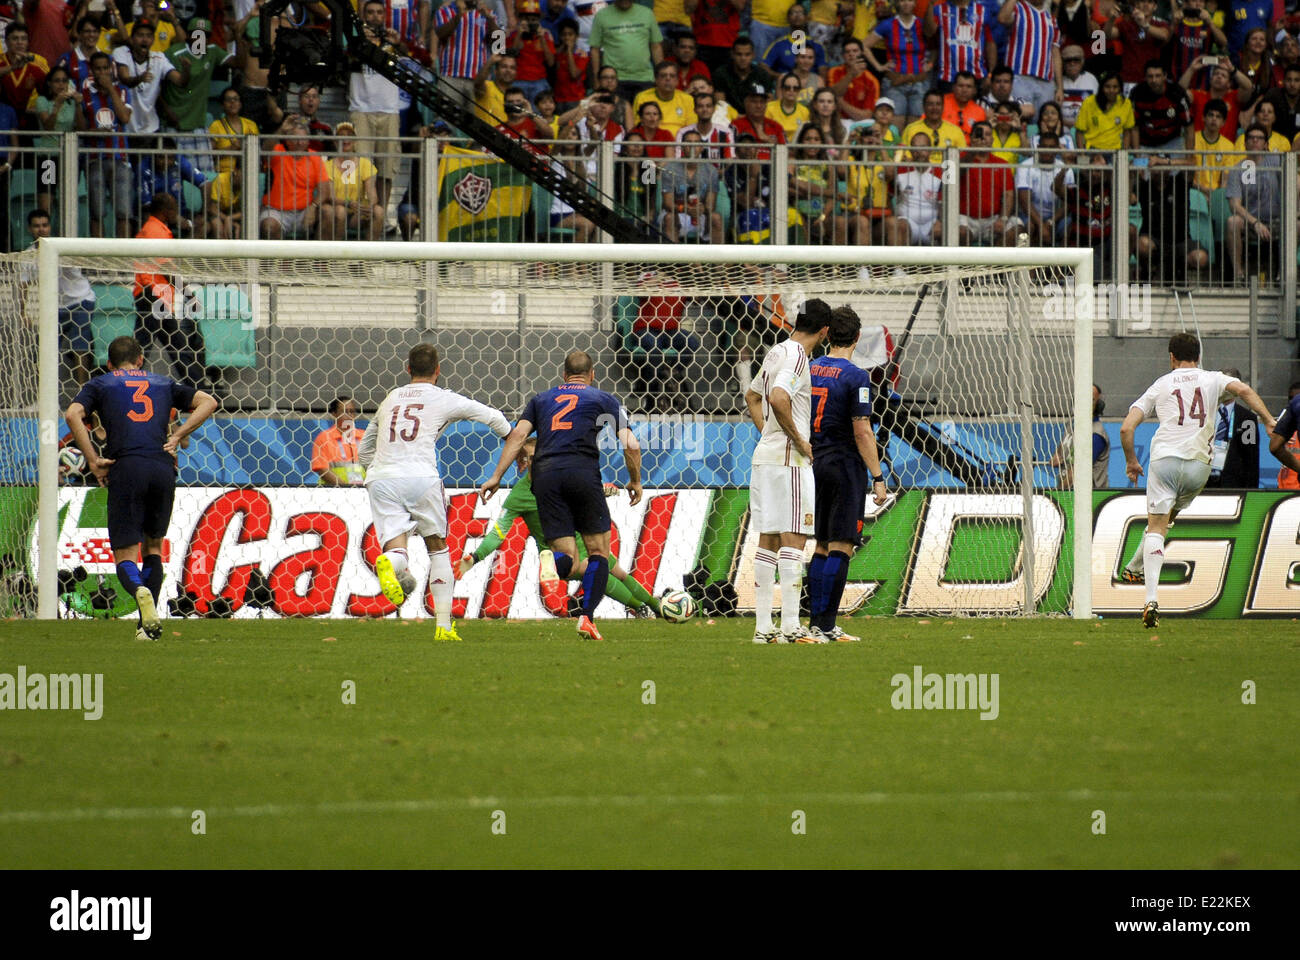 Salvador, Brazil. 13th June, 2014. Xabi Alonso, from Spain, sacks the penalty kick to score 1-0 Spain over Netherlands in Salvador, for the #3 match of the 2014 World Cup Credit:  Gustavo Basso/NurPhoto/ZUMAPRESS.com/Alamy Live News Stock Photo